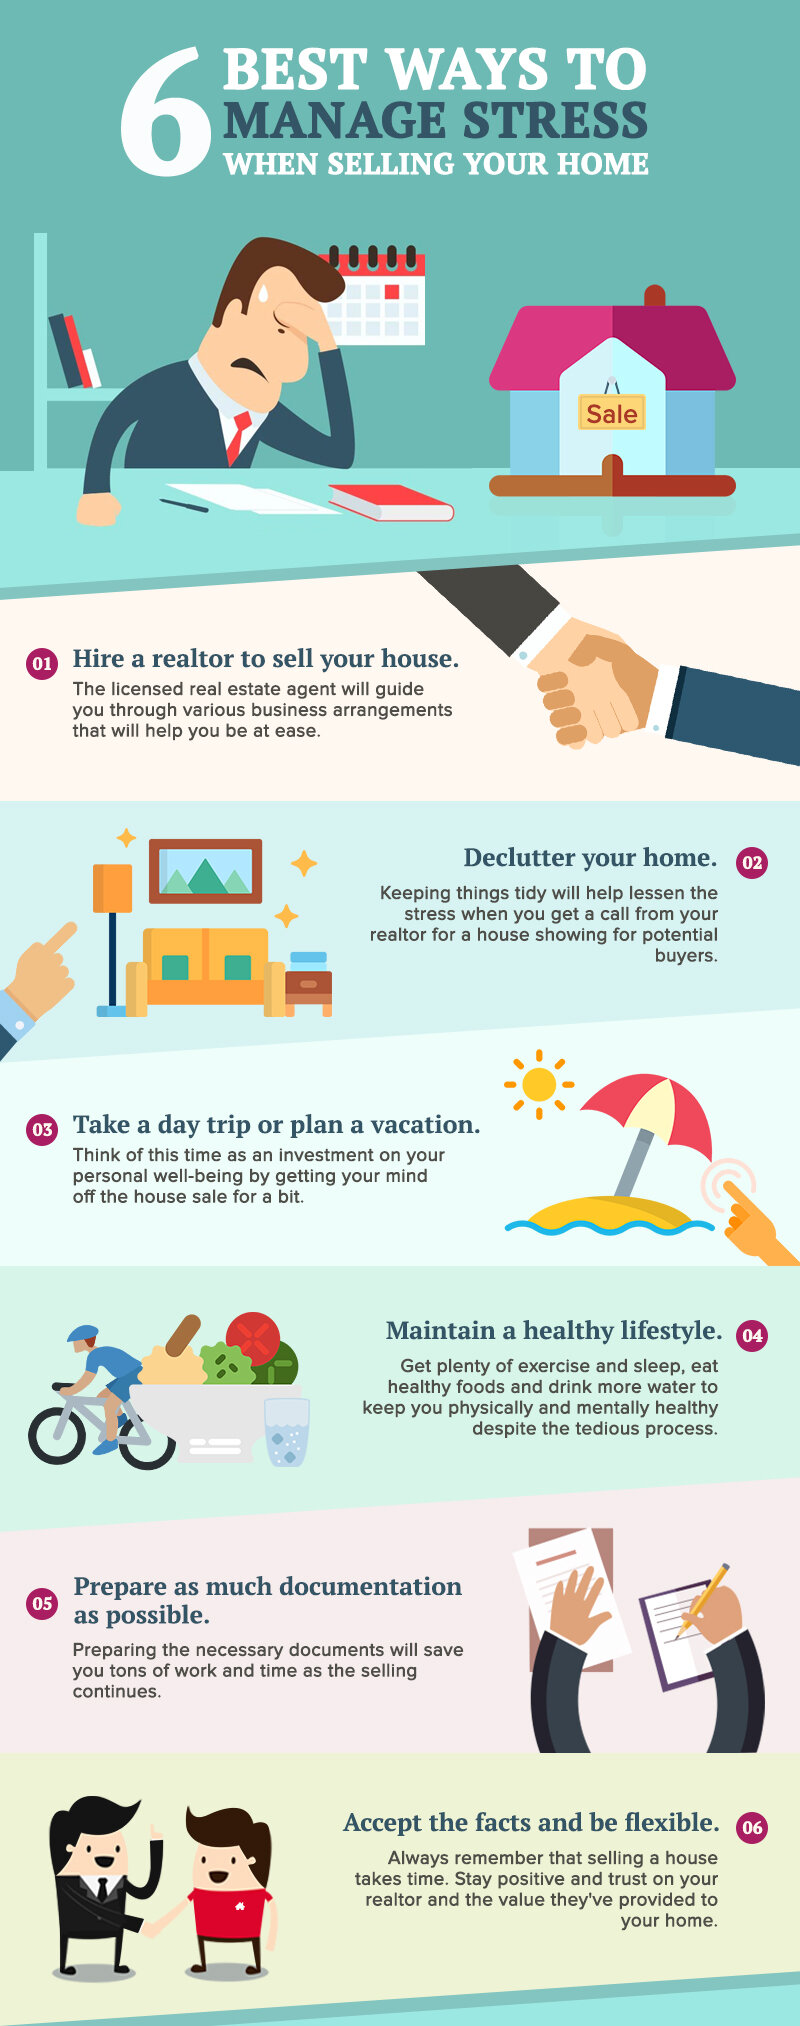 6 Of The Best Ways to Manage Stress When Selling Your Home